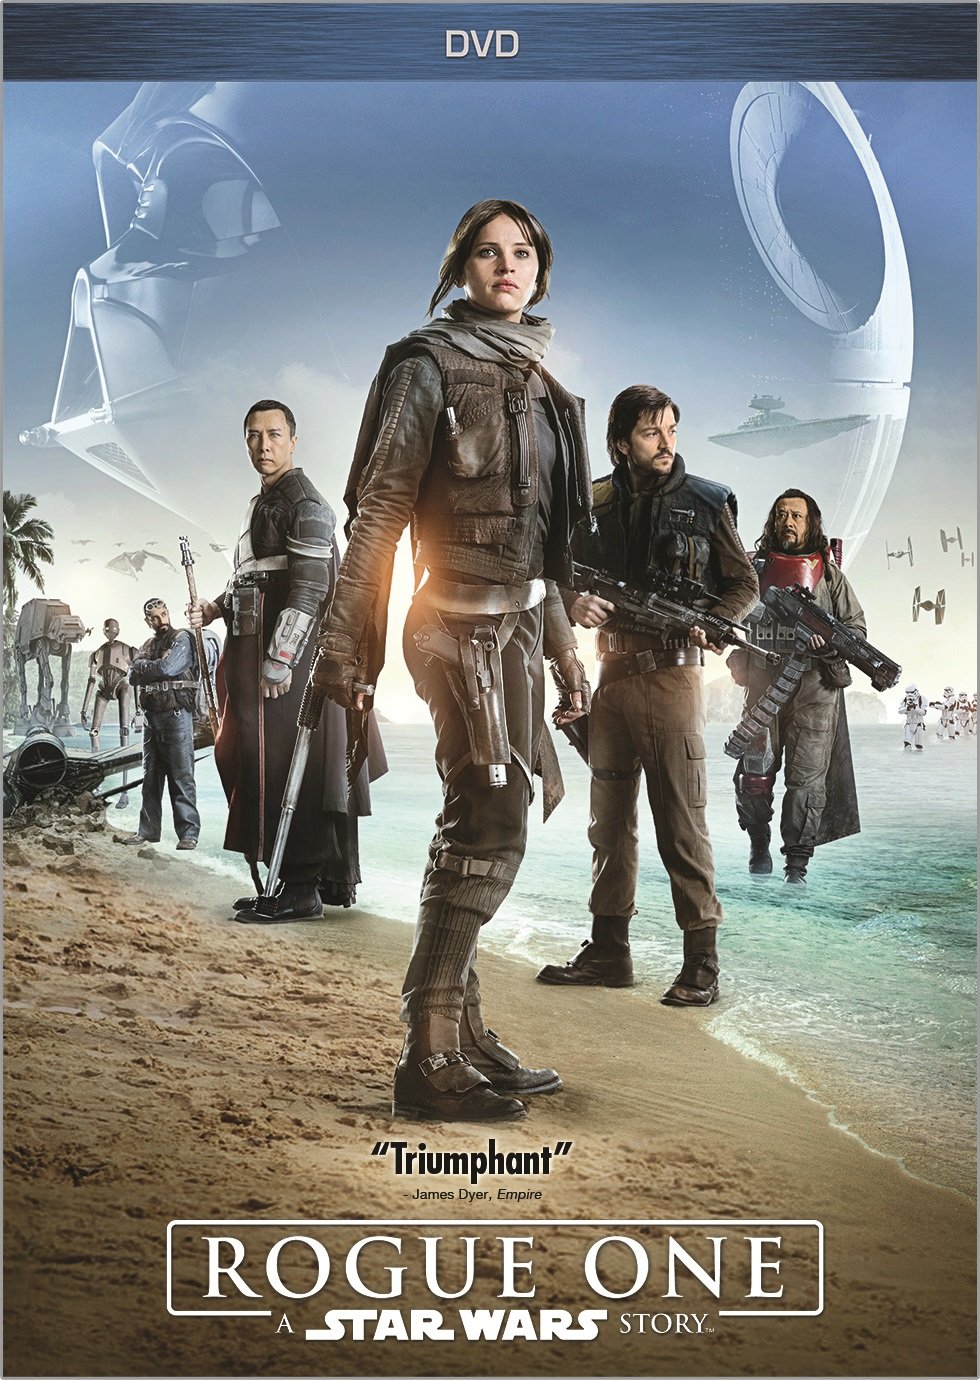 Rogue One: A Star Wars Story DVD Release Date April 4, 2017